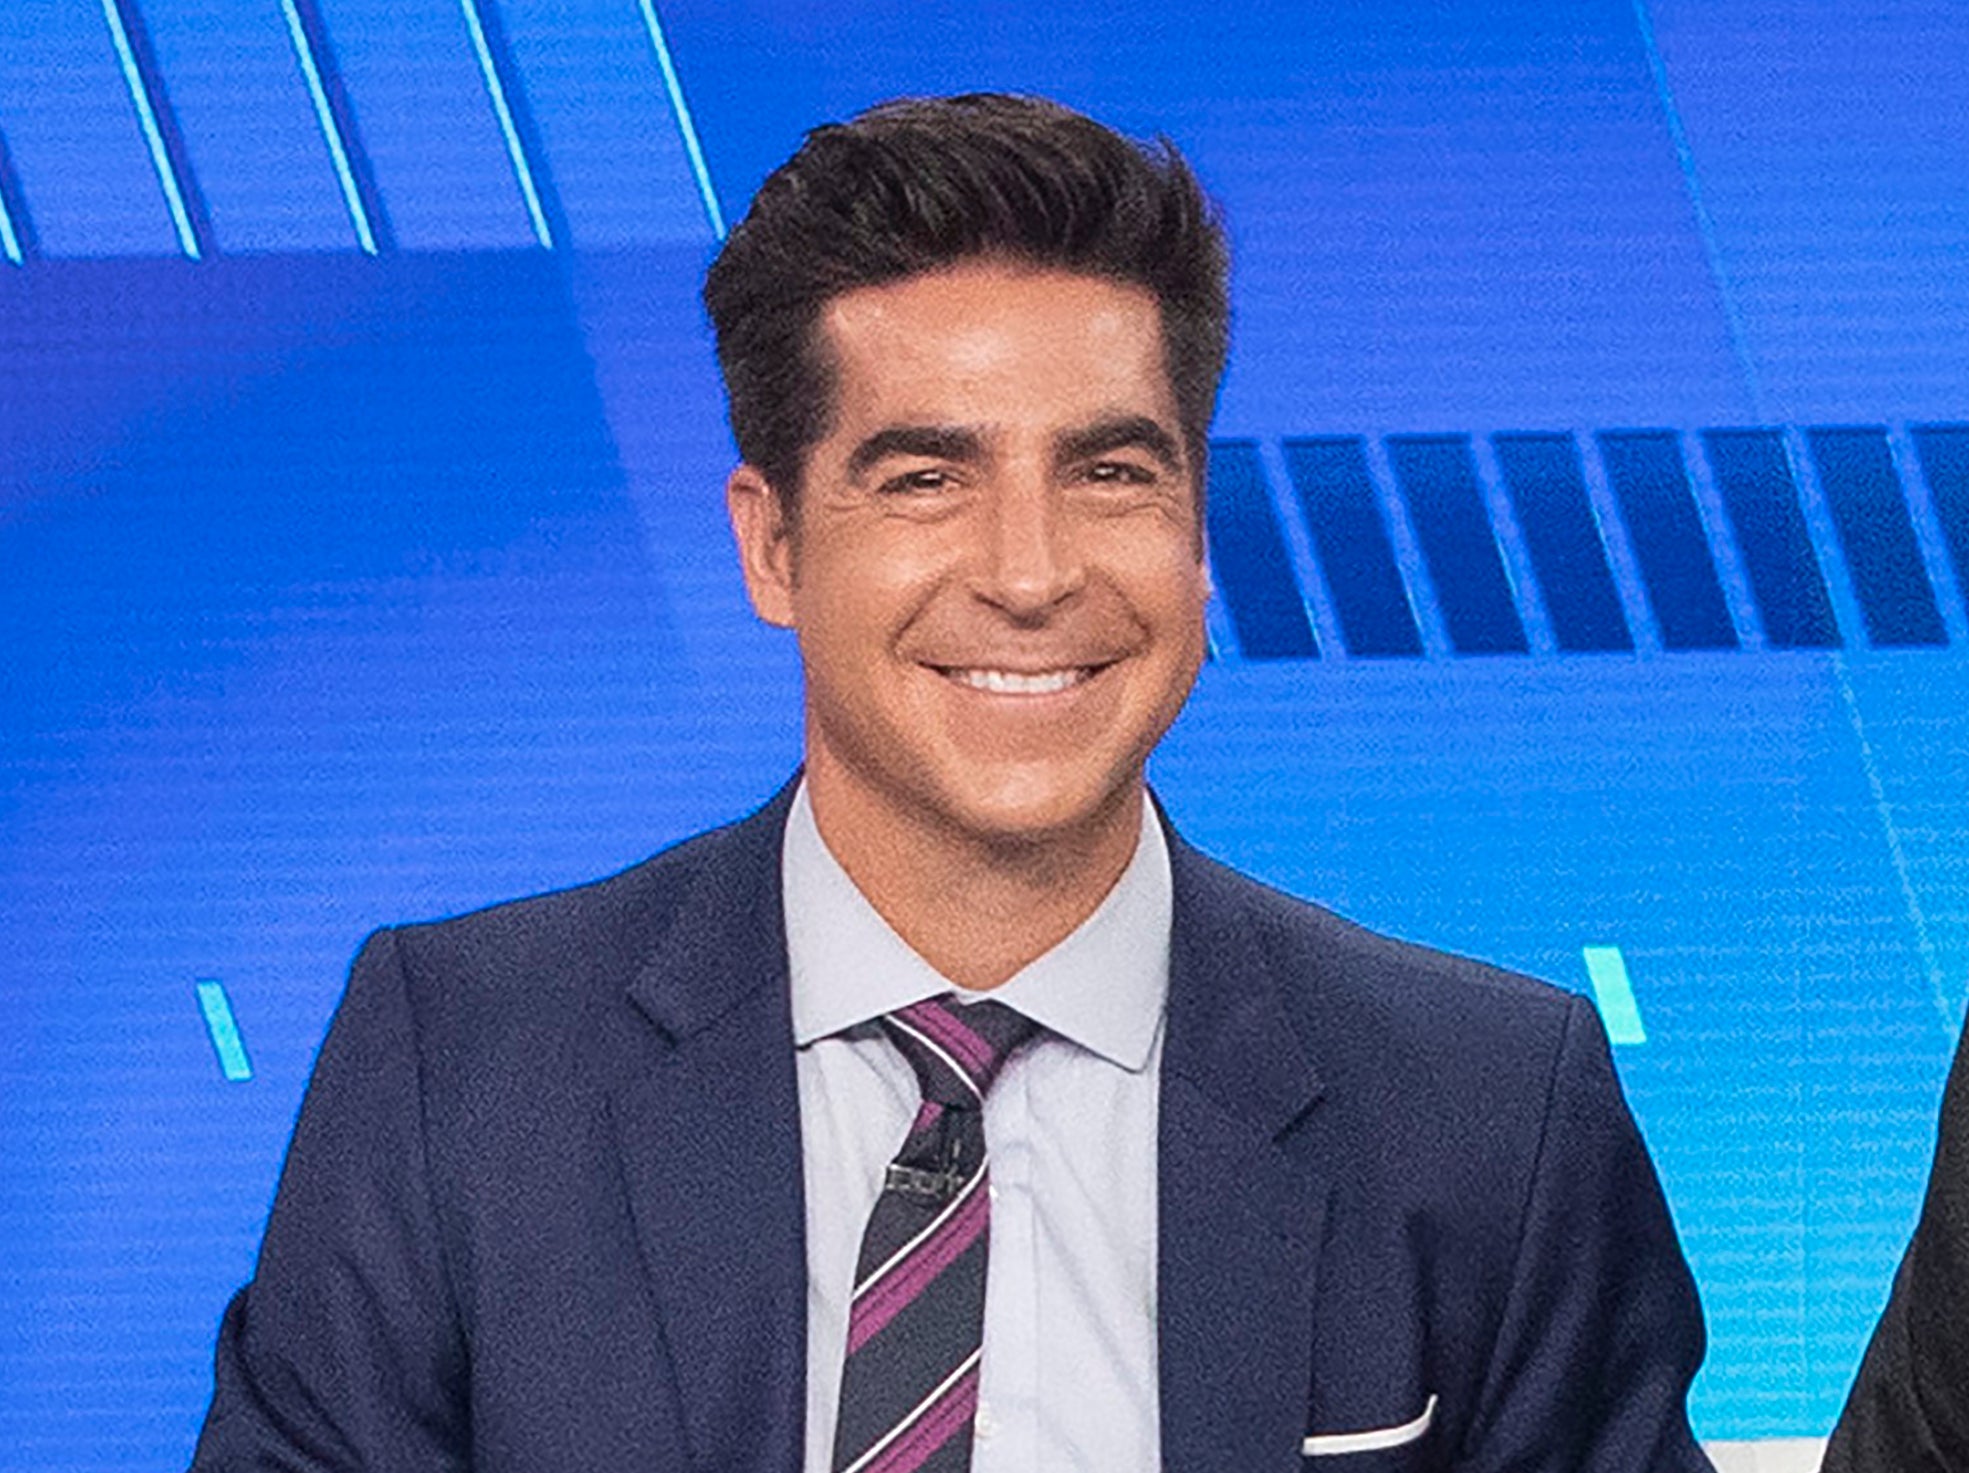 Jesse Watters will take over Tucker Carlson’s vacant 8pm show